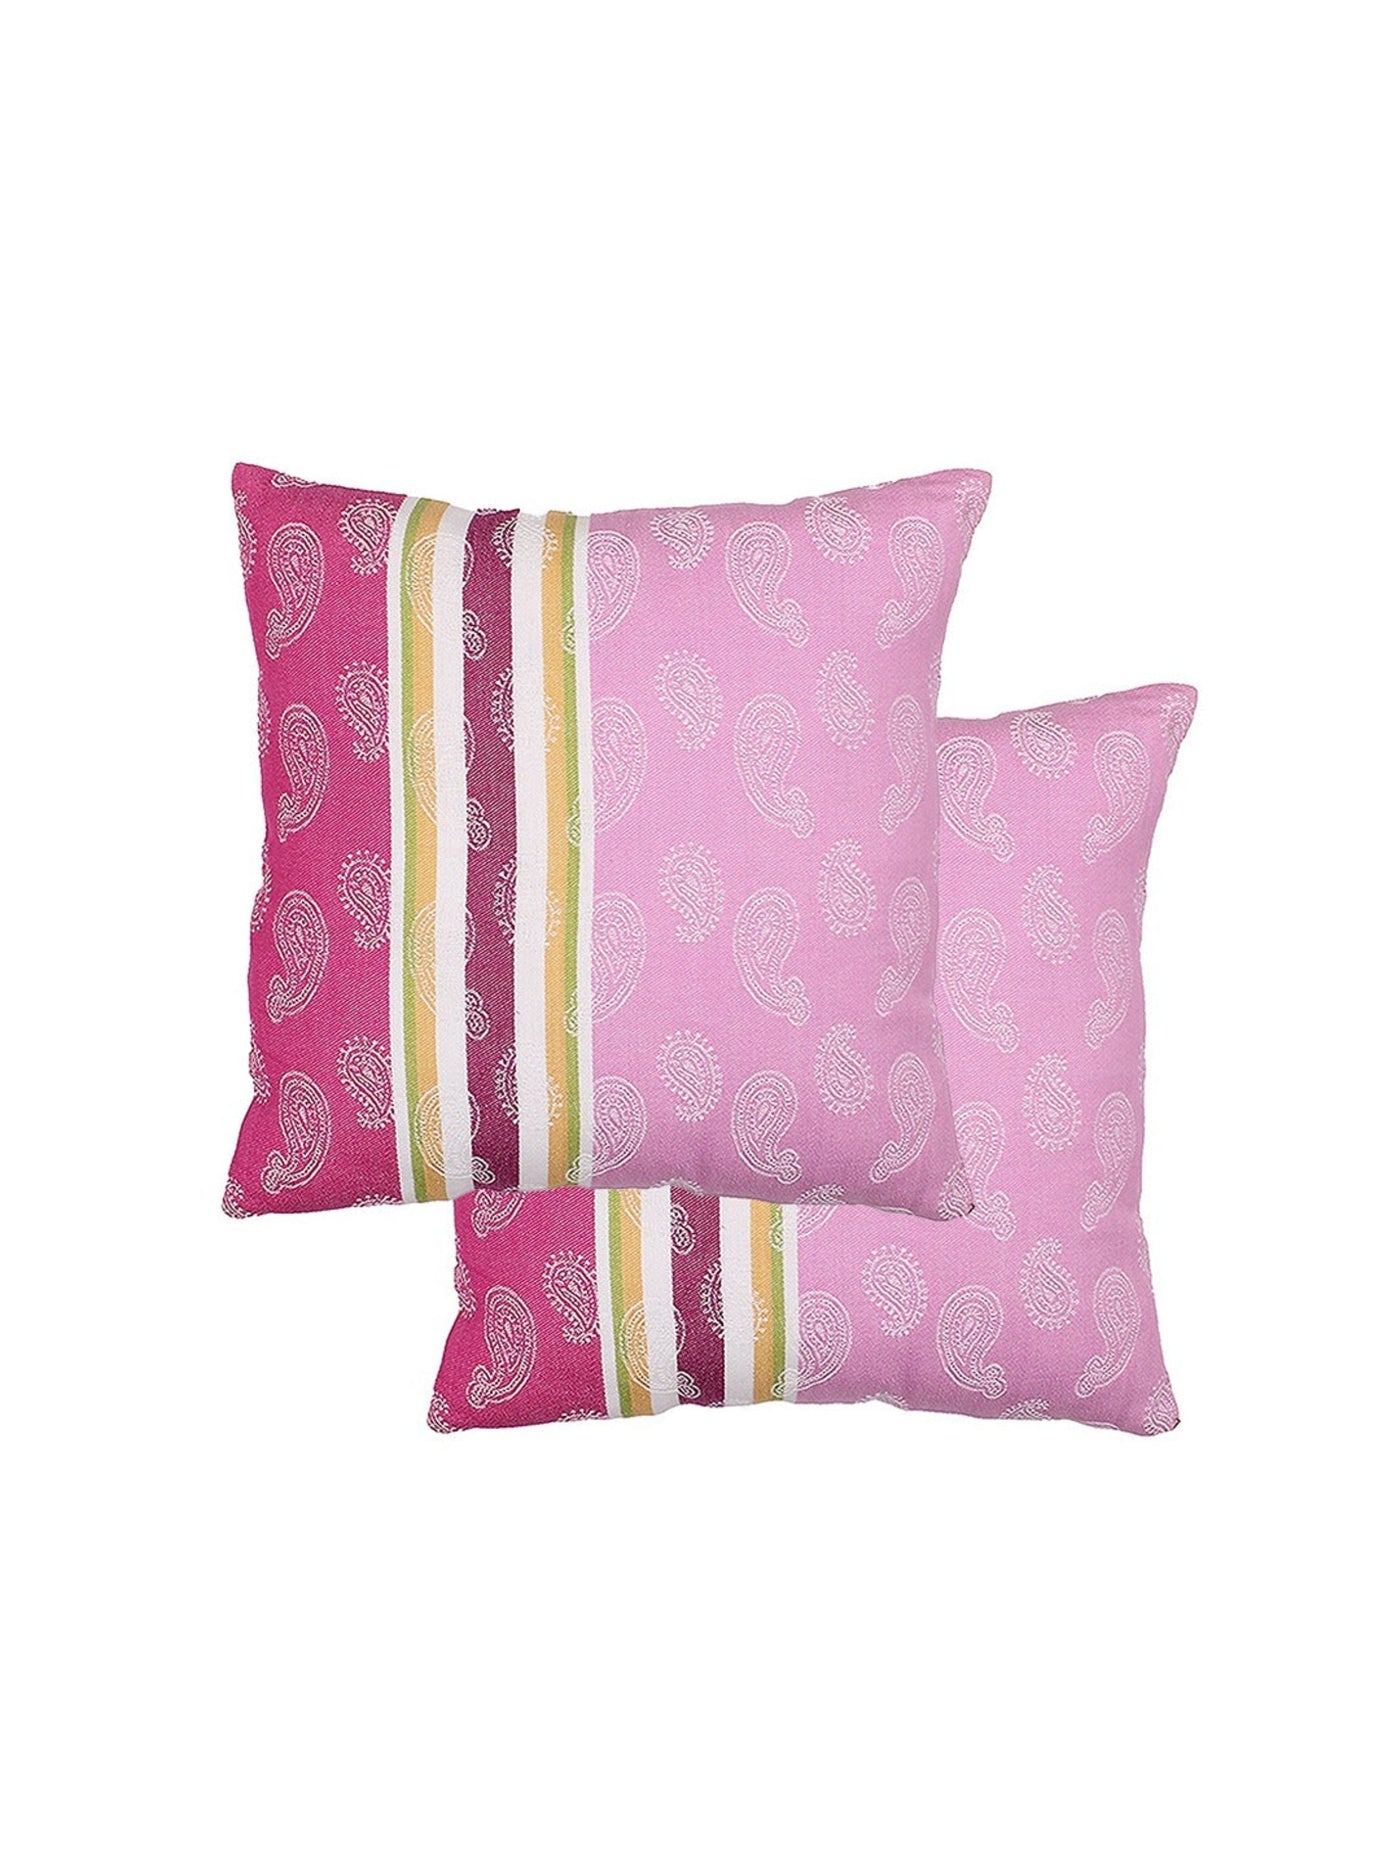 Cushion Cover - Finished Goods-Living-2 s-8903773000920